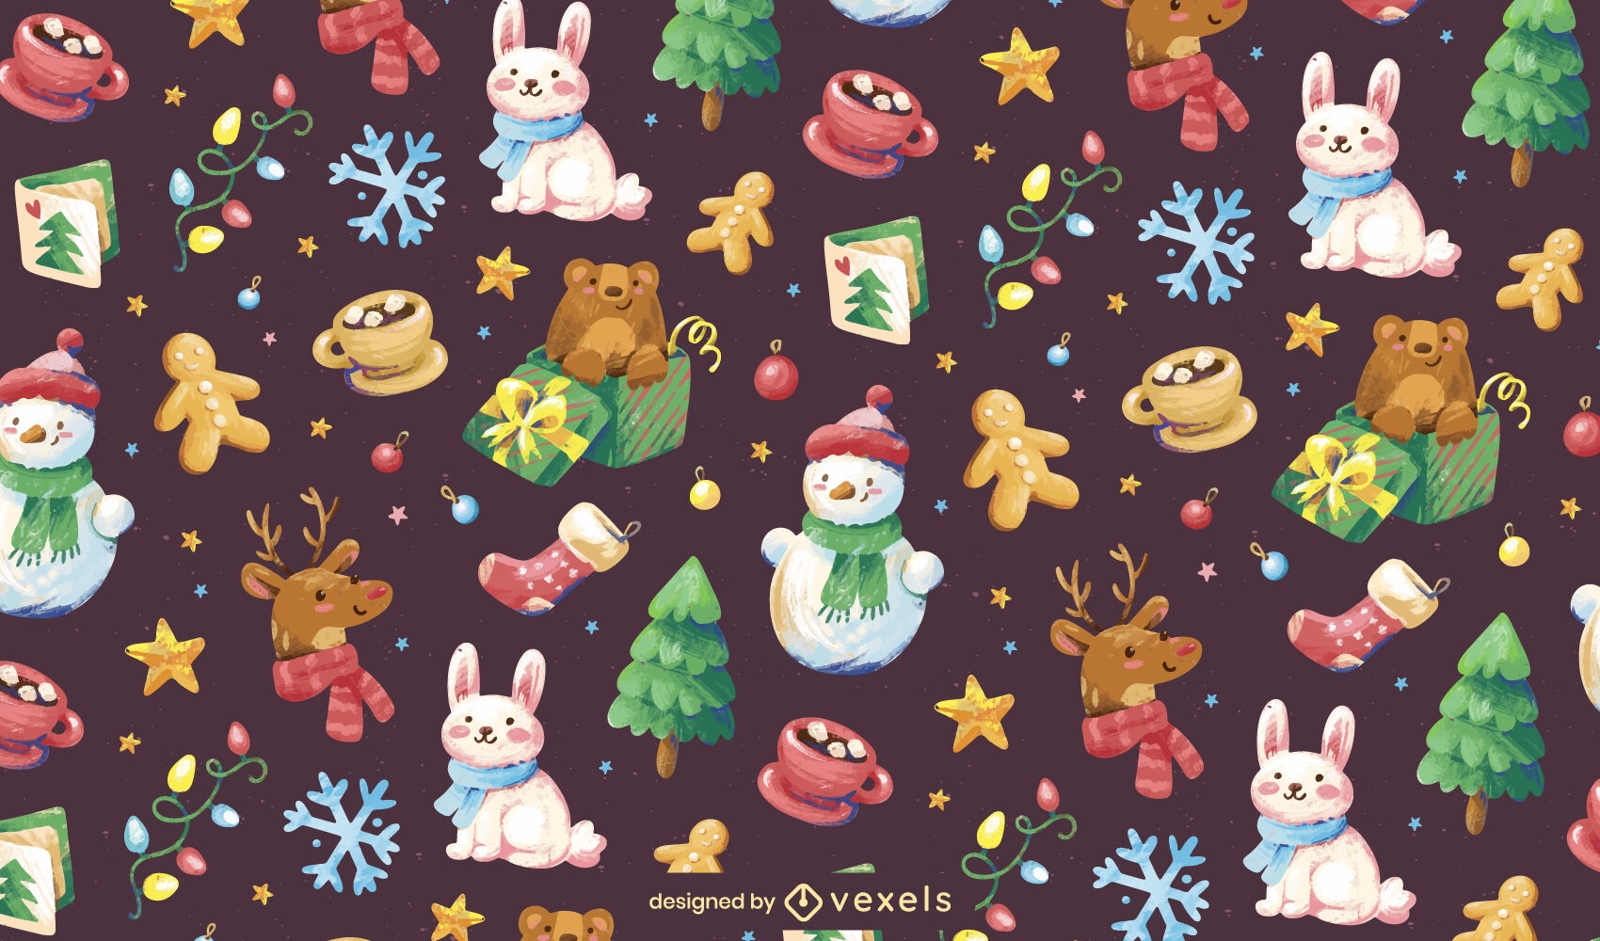 Christmas holiday elements pattern design